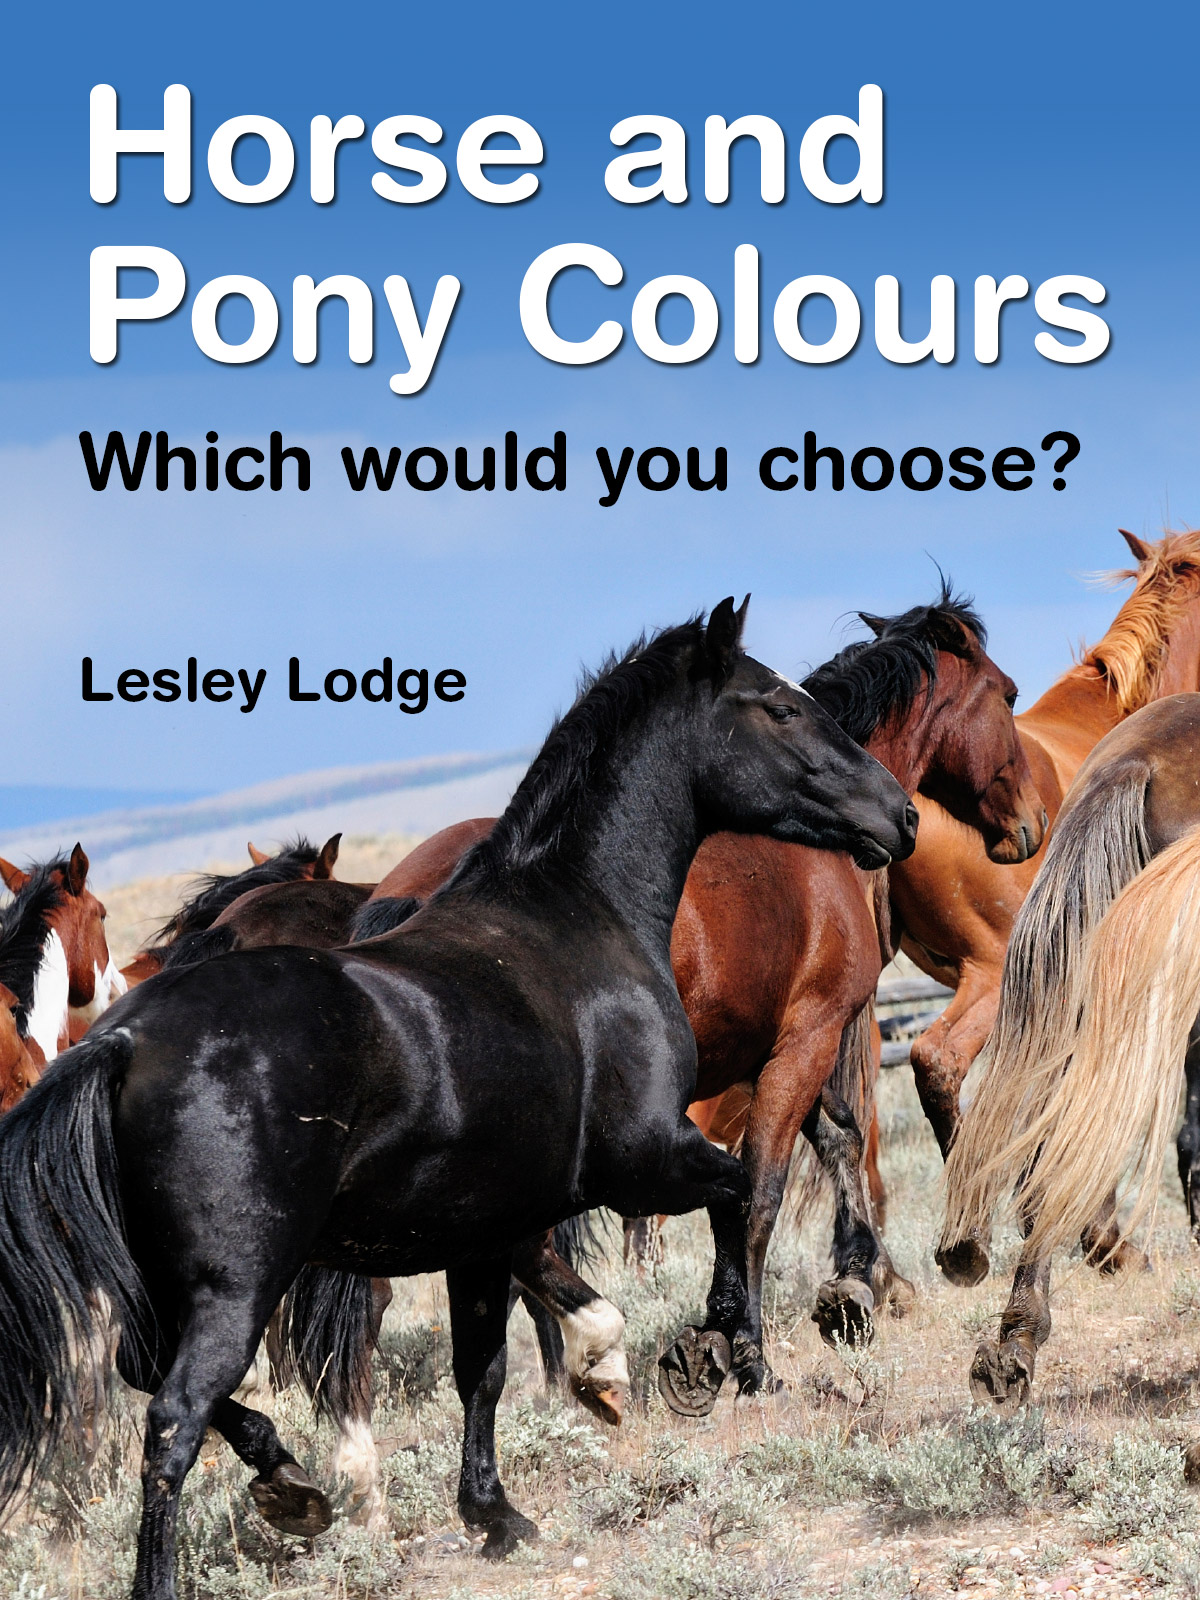 Horse and Poby Colours by Lesley Lodge